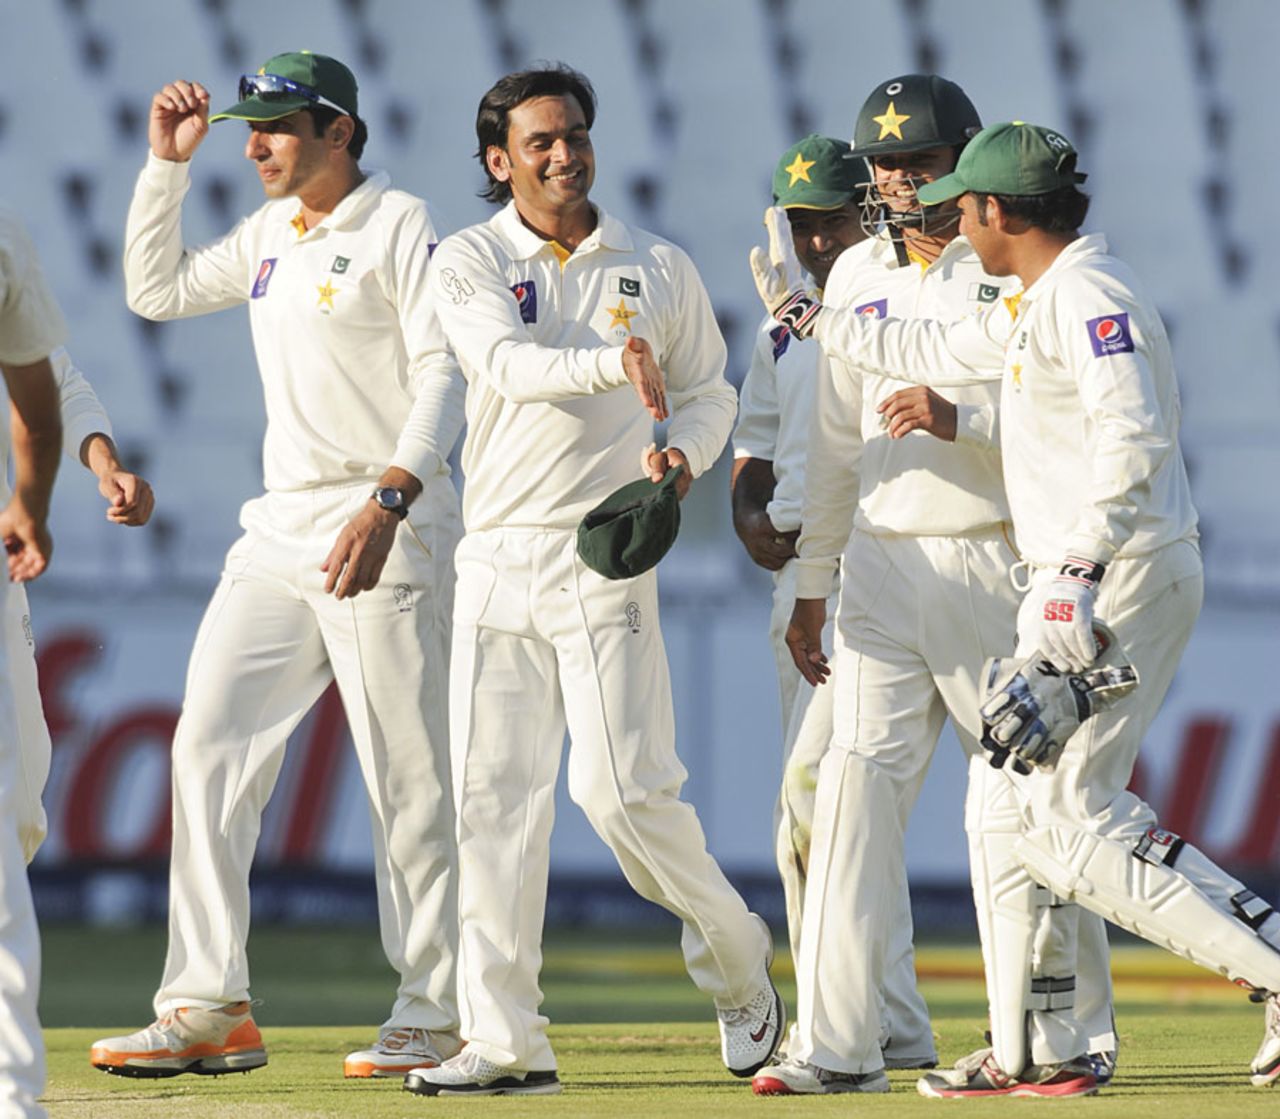 Mohammad Hafeez takes the plaudits from his team-mates, South Africa v Pakistan, 1st Test, Johannesburg, February 1, 2013